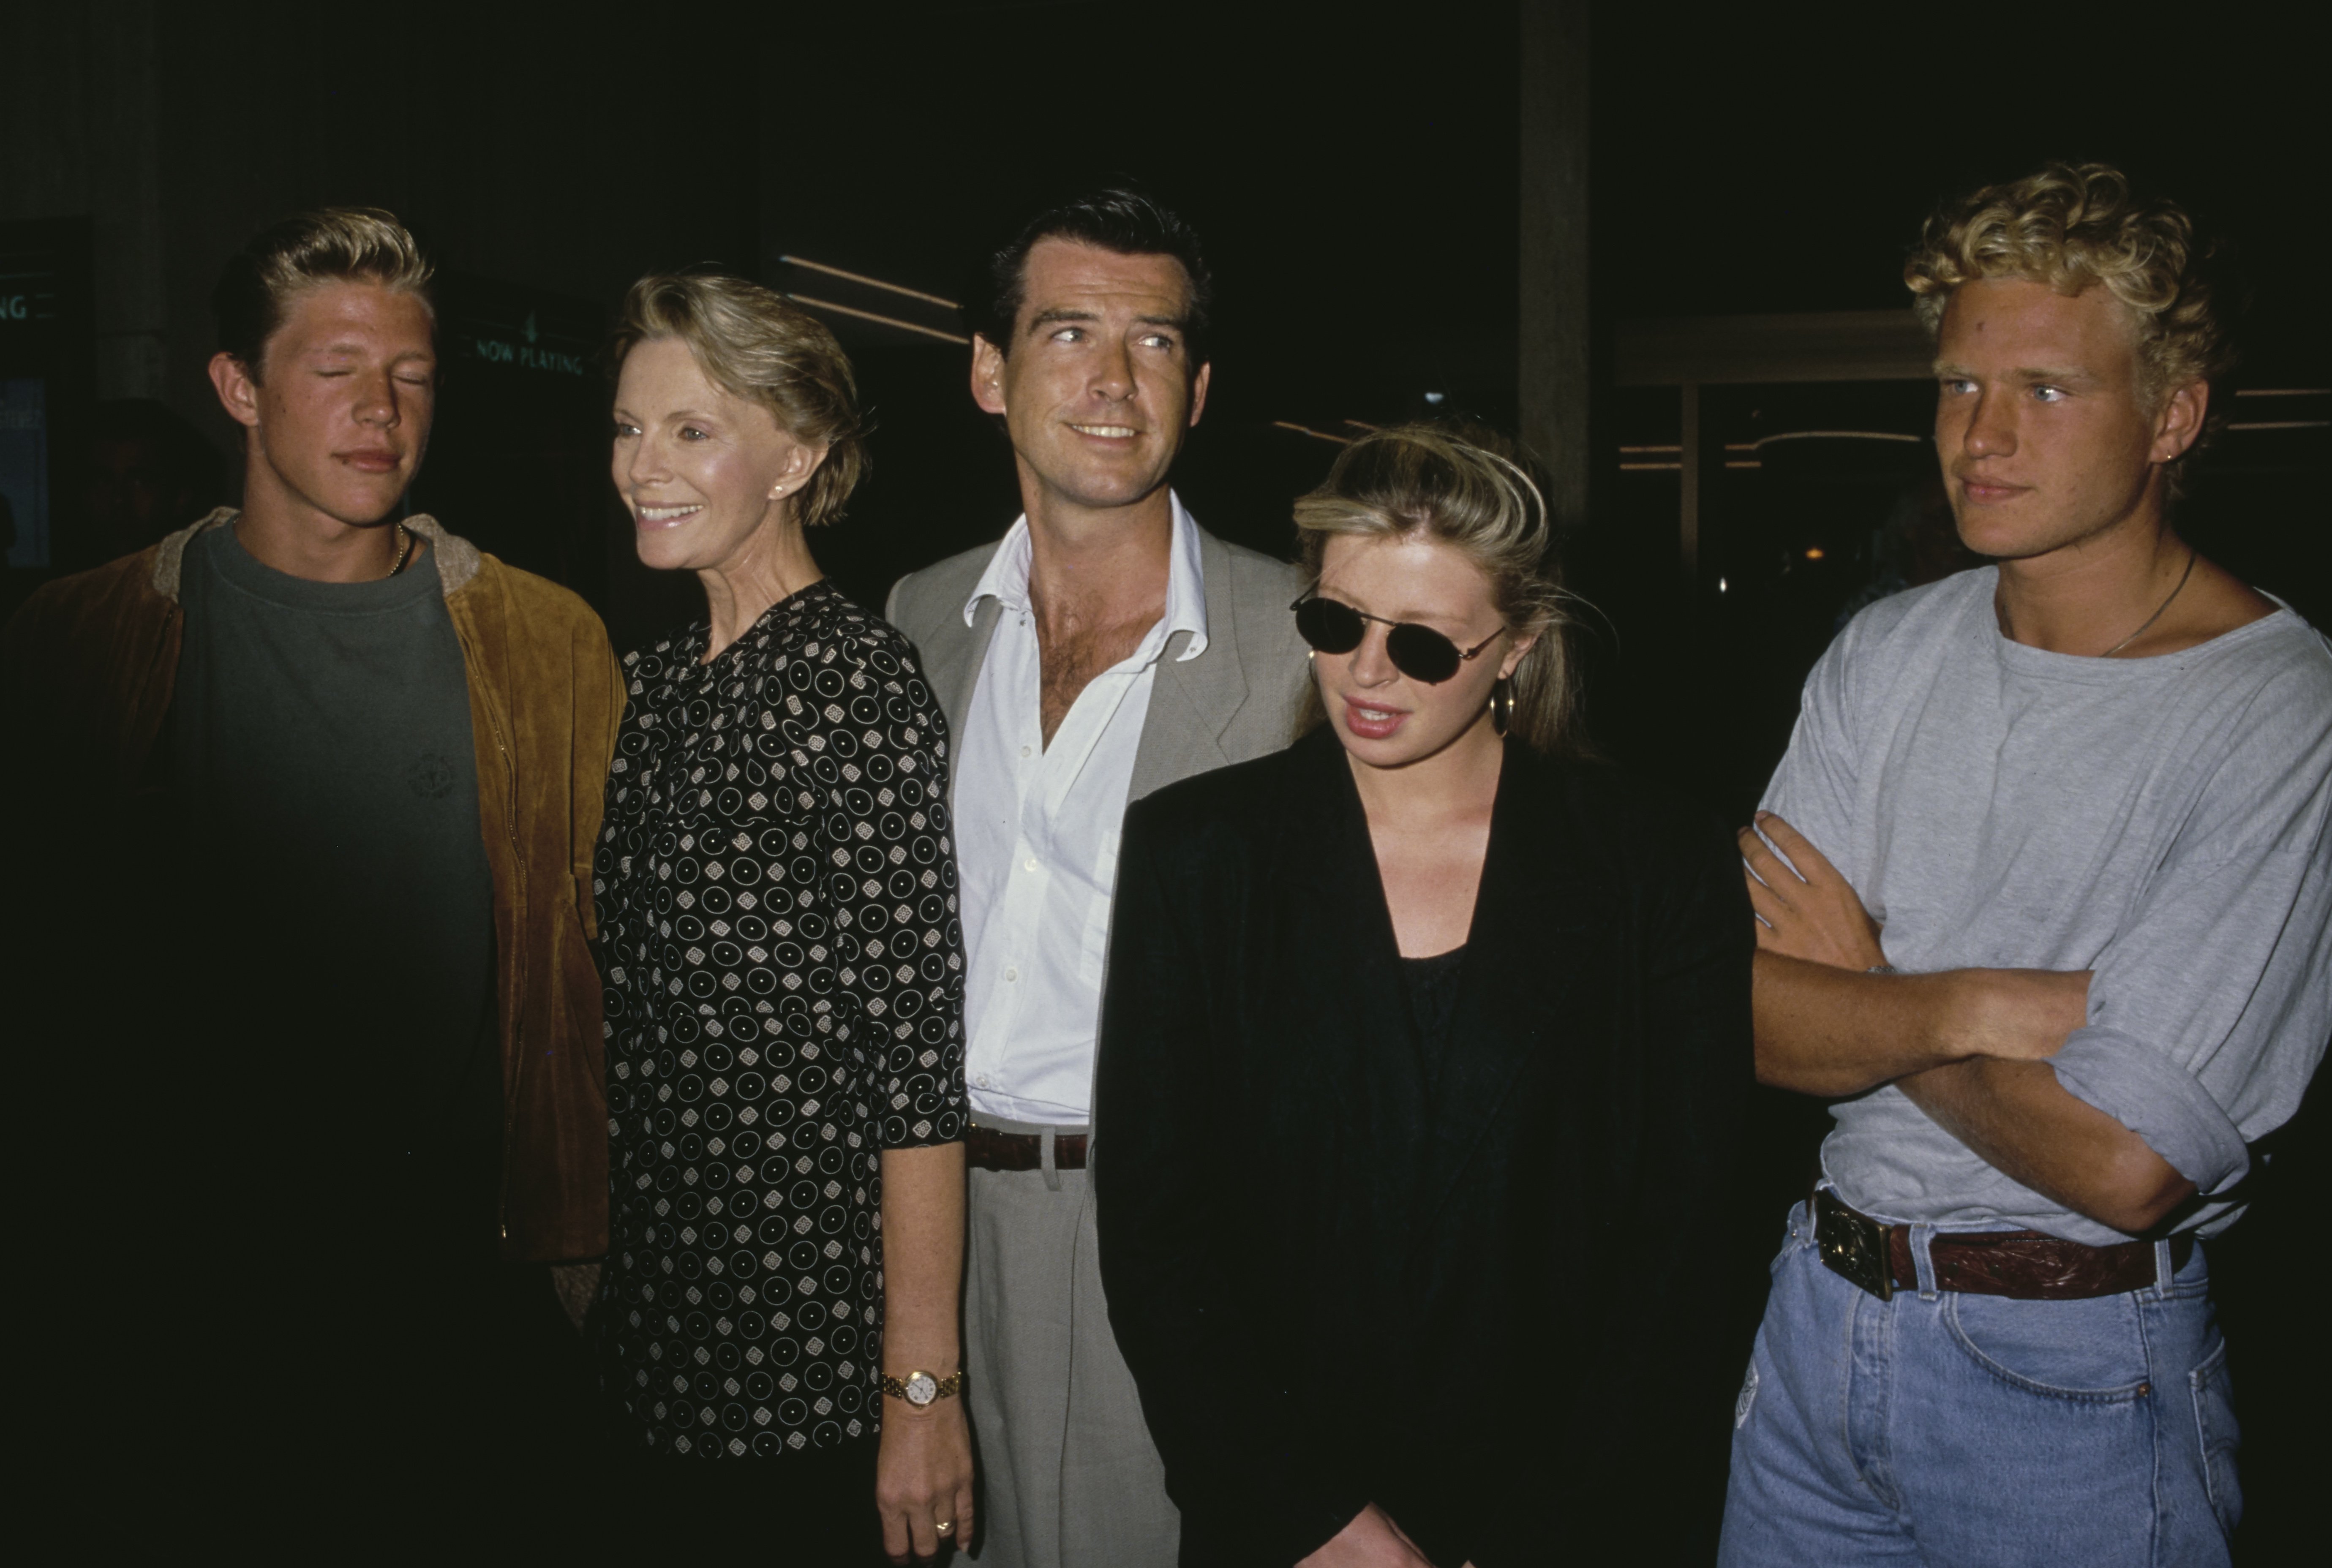 Pierce Brosnan with wife Cassandra Harrisand children Christopher Brosnan, Charlotte Brosnan and her boyfriend Alex Smith during the "Postcards from the Edge" Century City Premiere on September 10, 1990. | Source: Getty Images